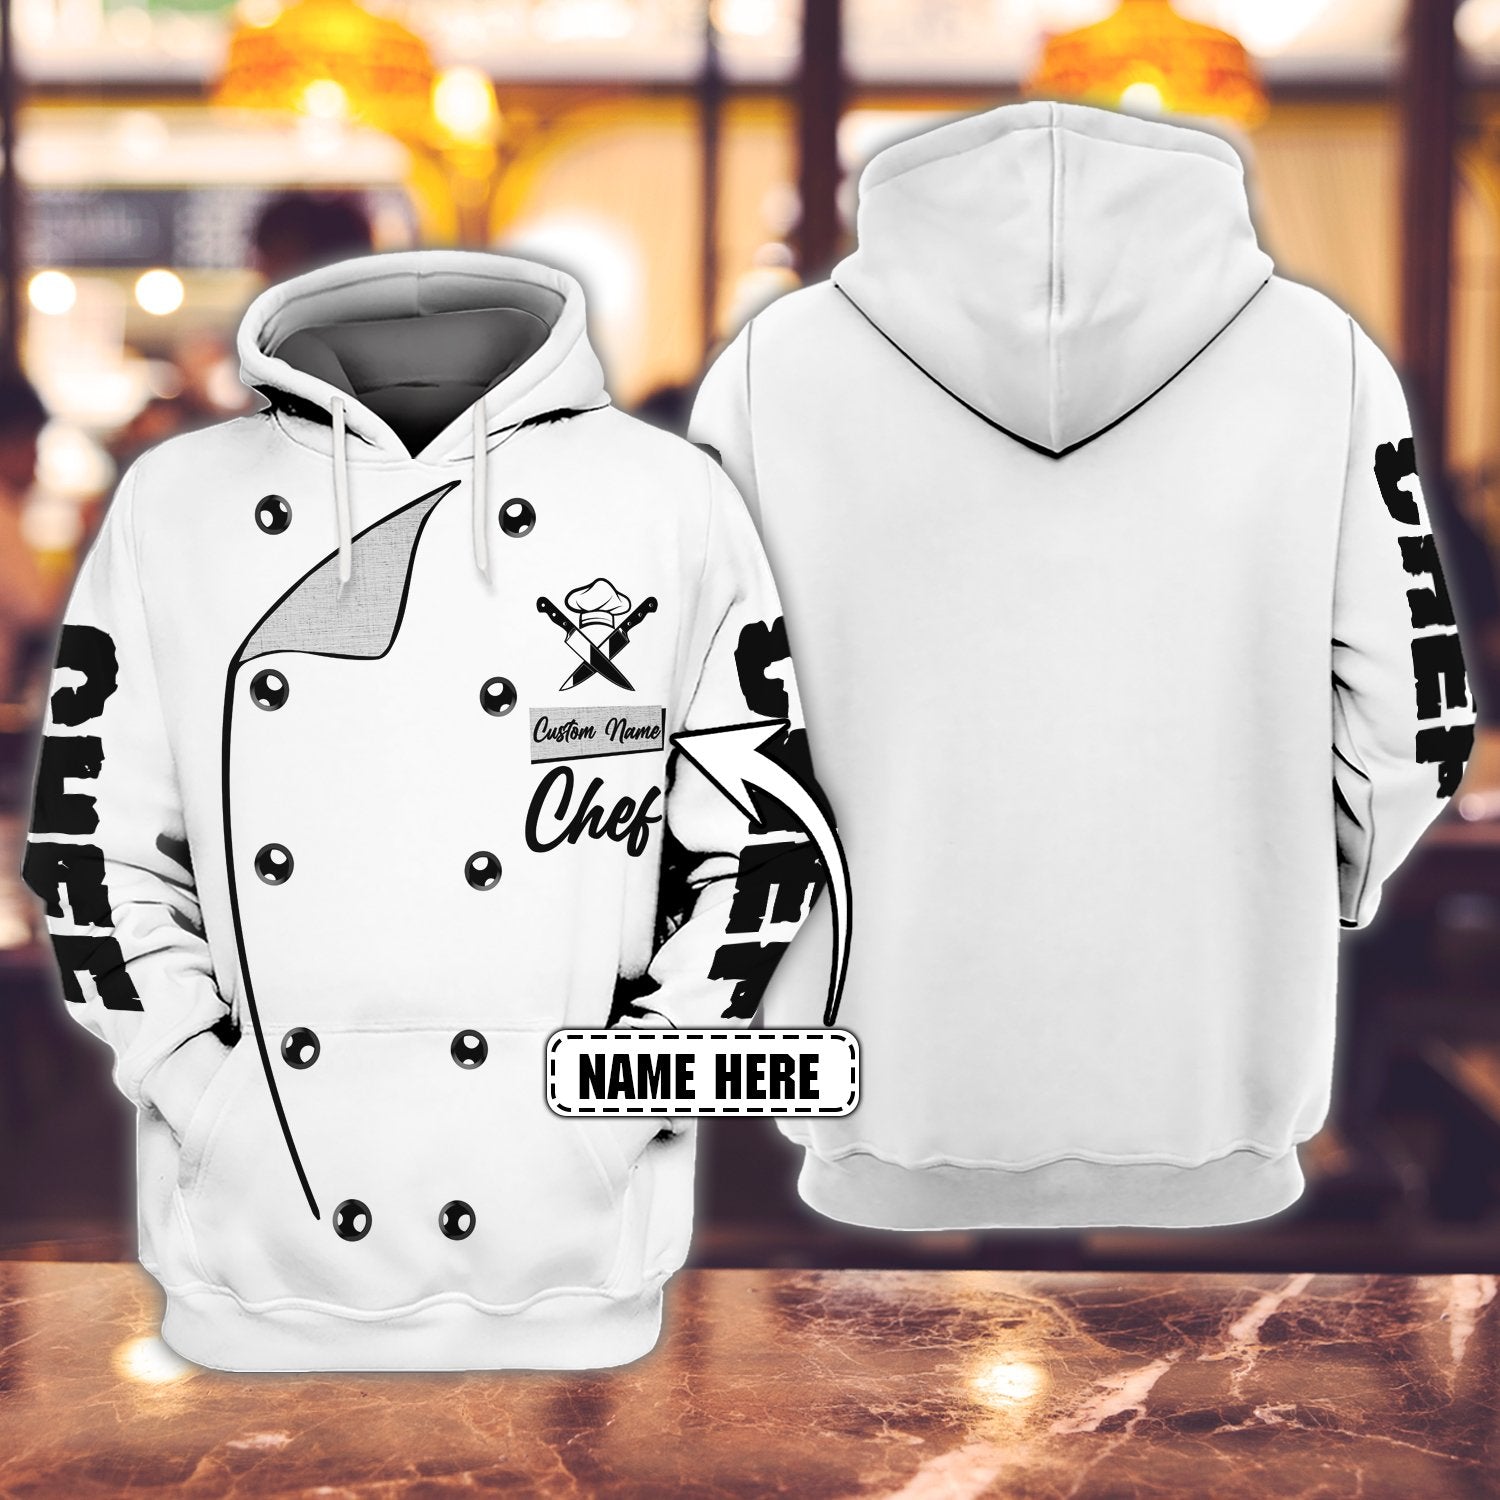 Personalized Name 3D Hoodie Chef Shirt/ Idea Gift for Master Chef